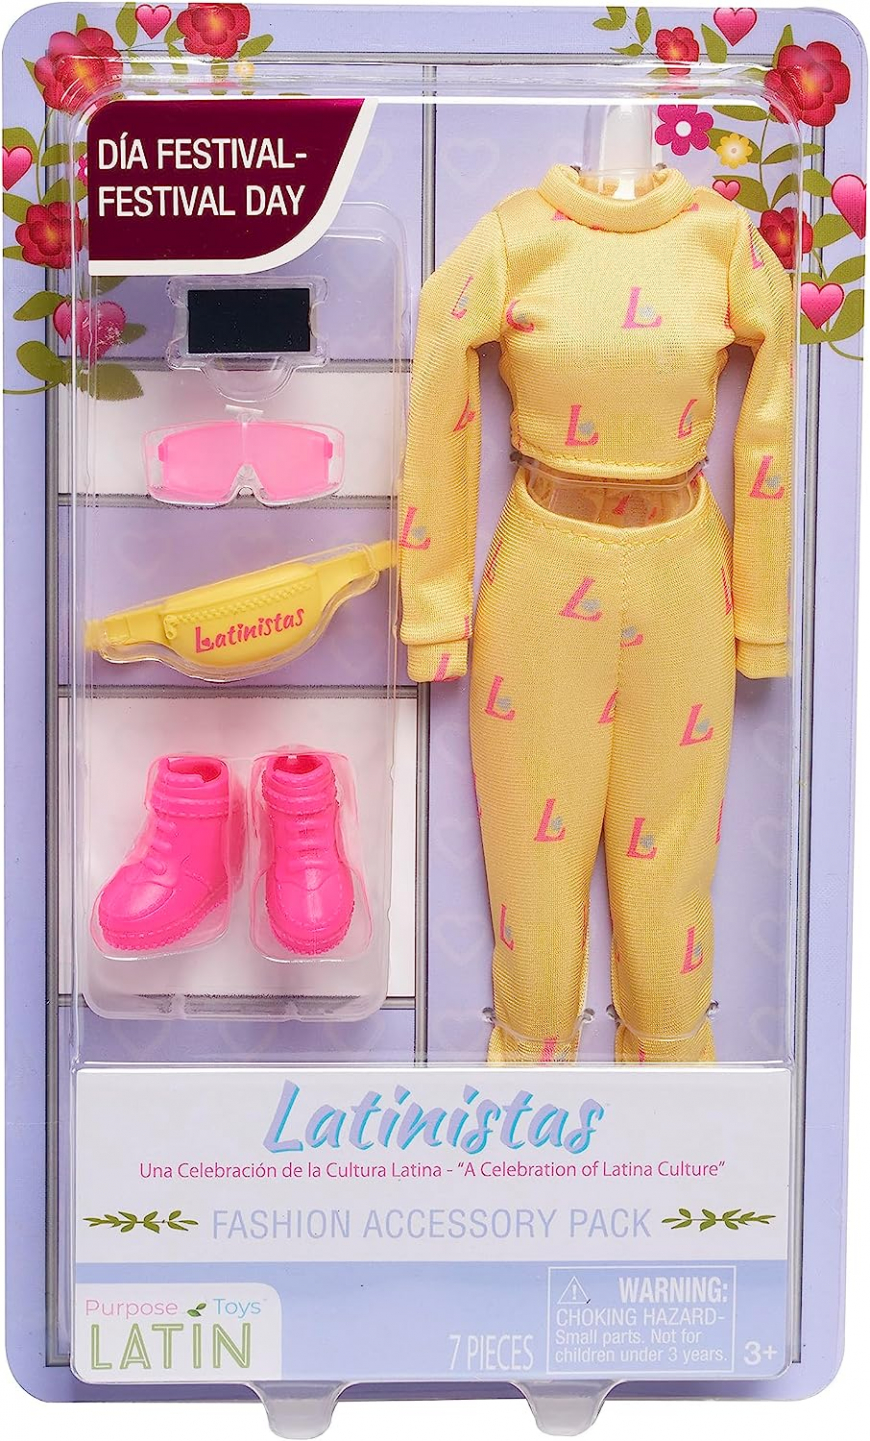 Latinistas Fashion Pack “Festival Day”